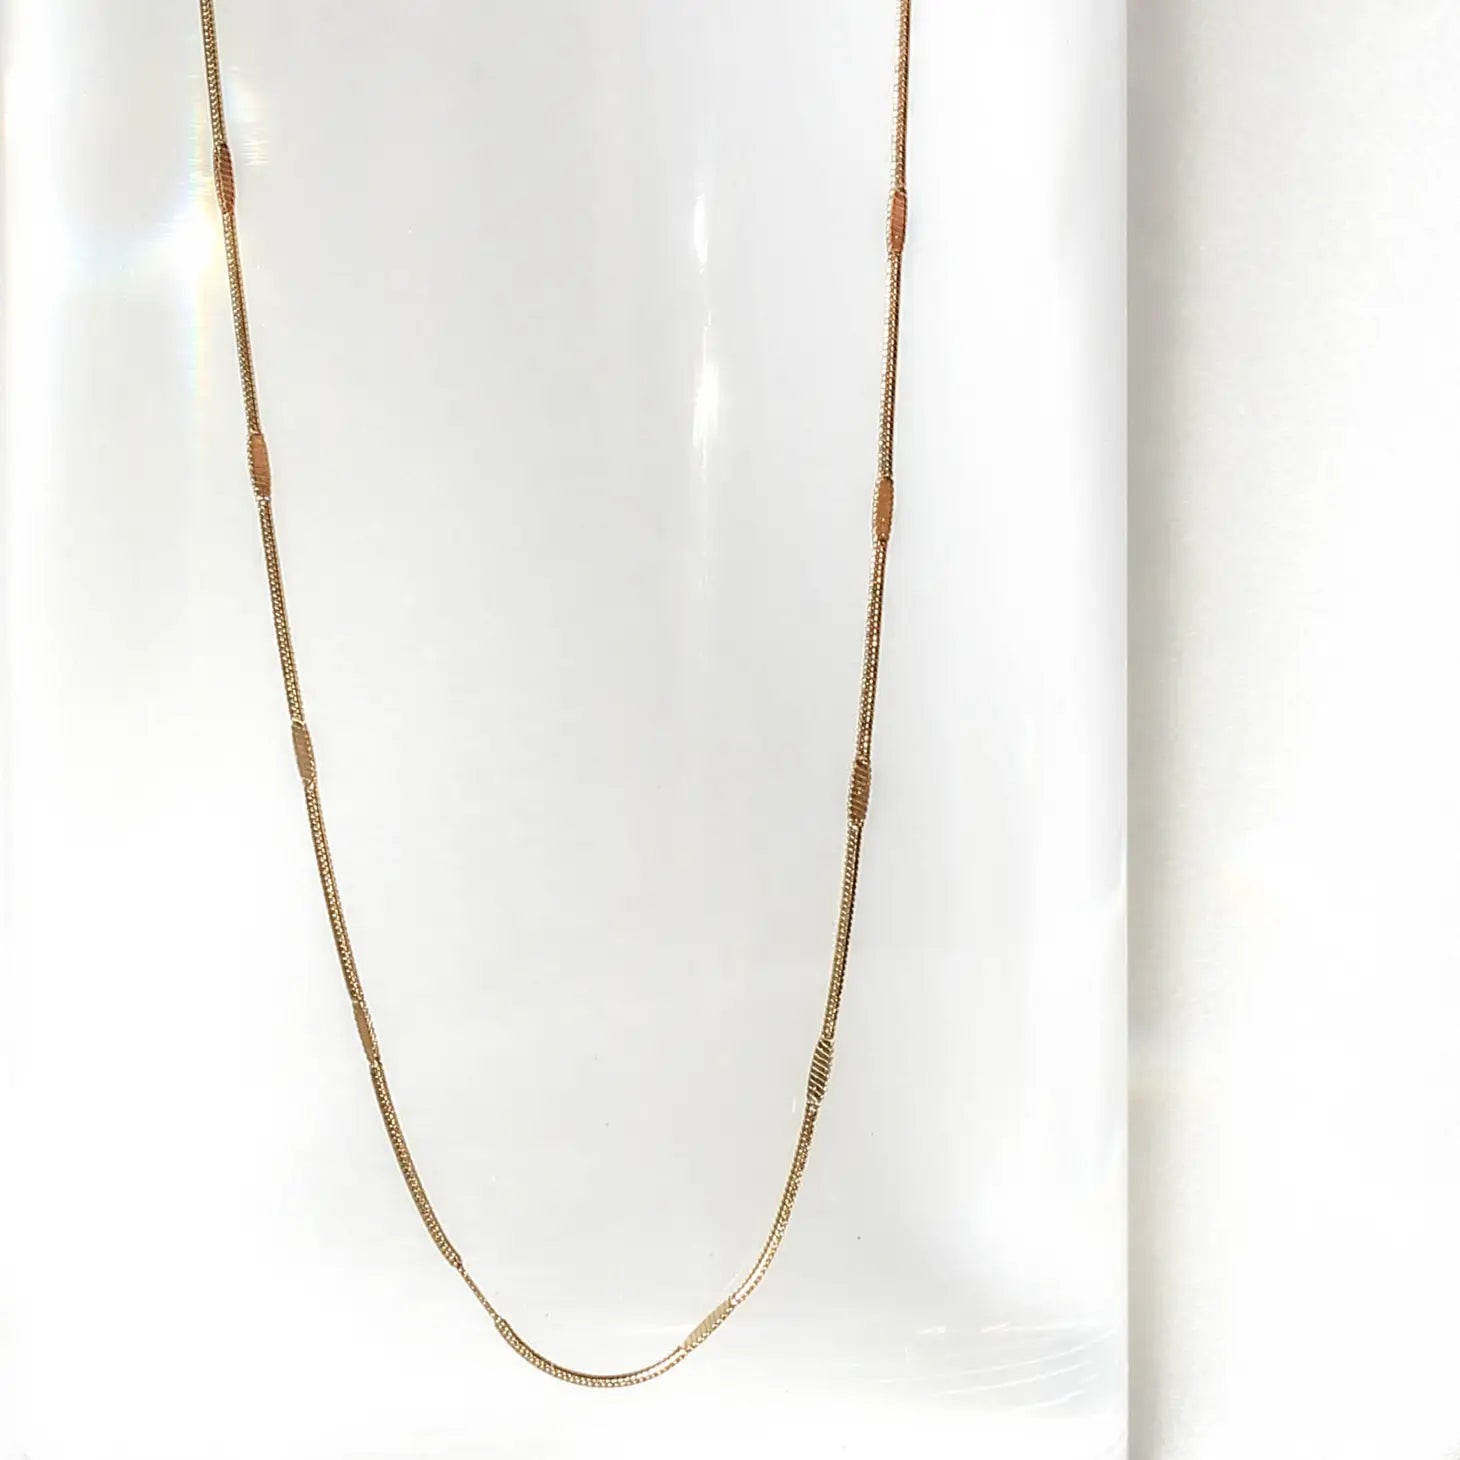 Pressed Chain Gold Necklace- 19.5"